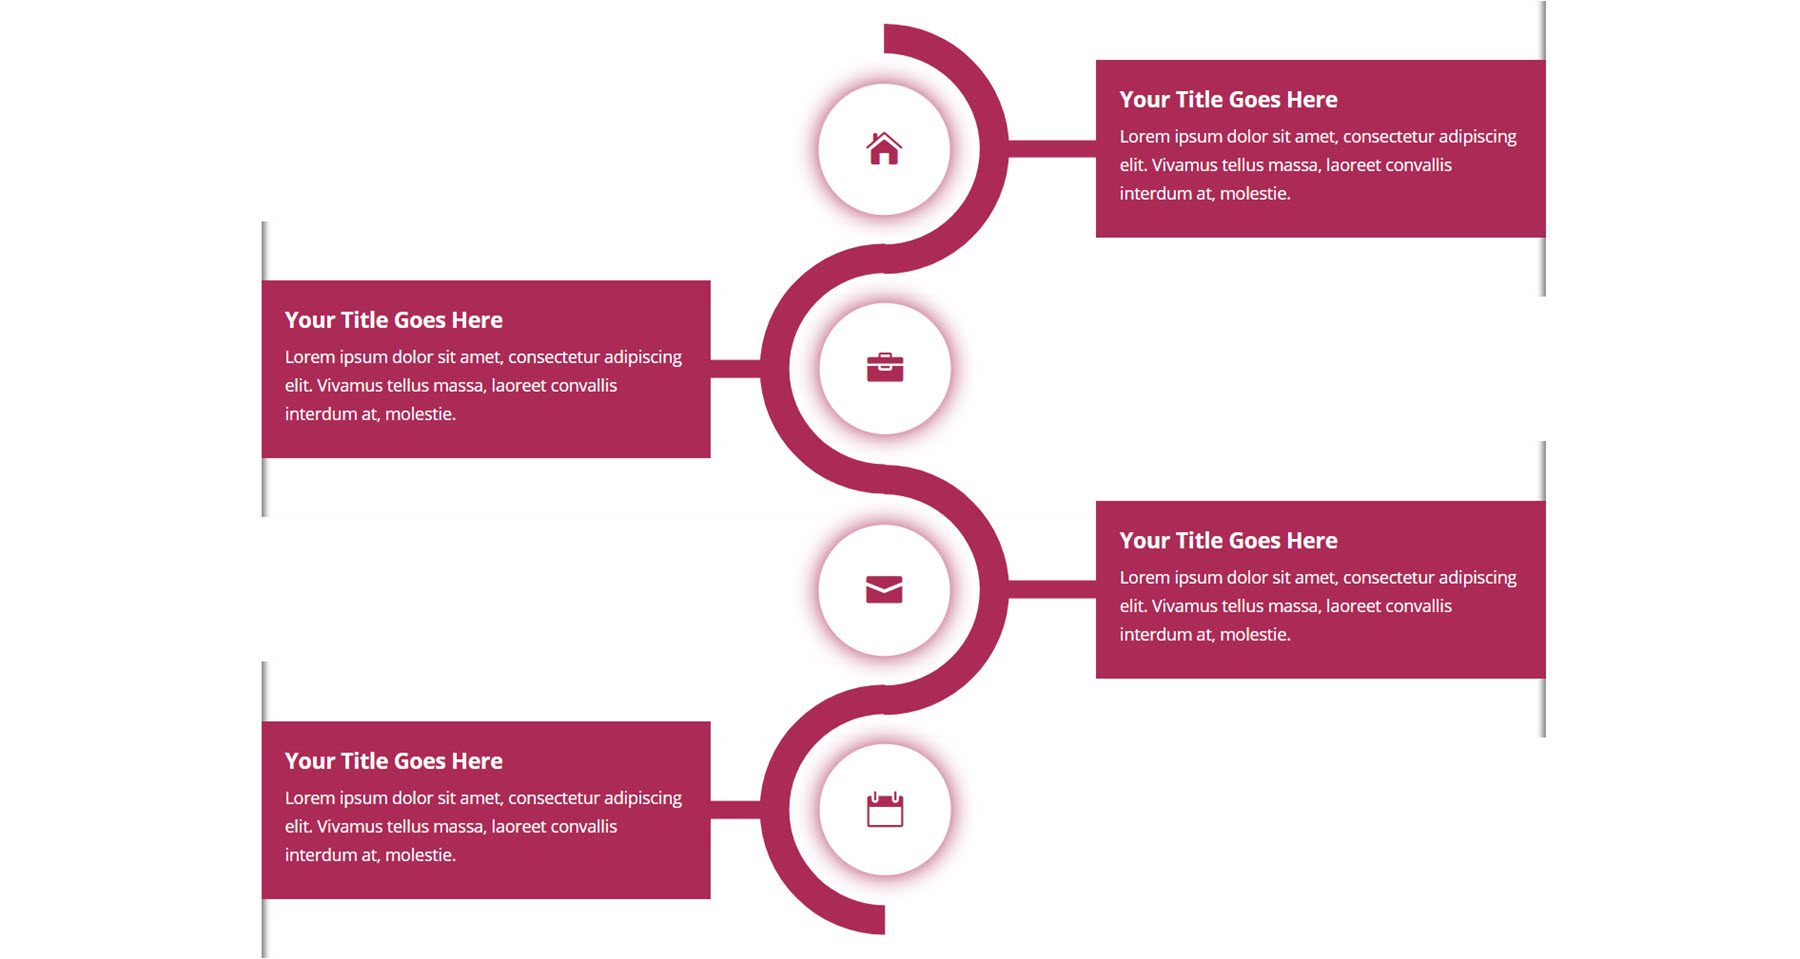 Divi Product Highlight Divi Timeline Layouts Pack Layout 6